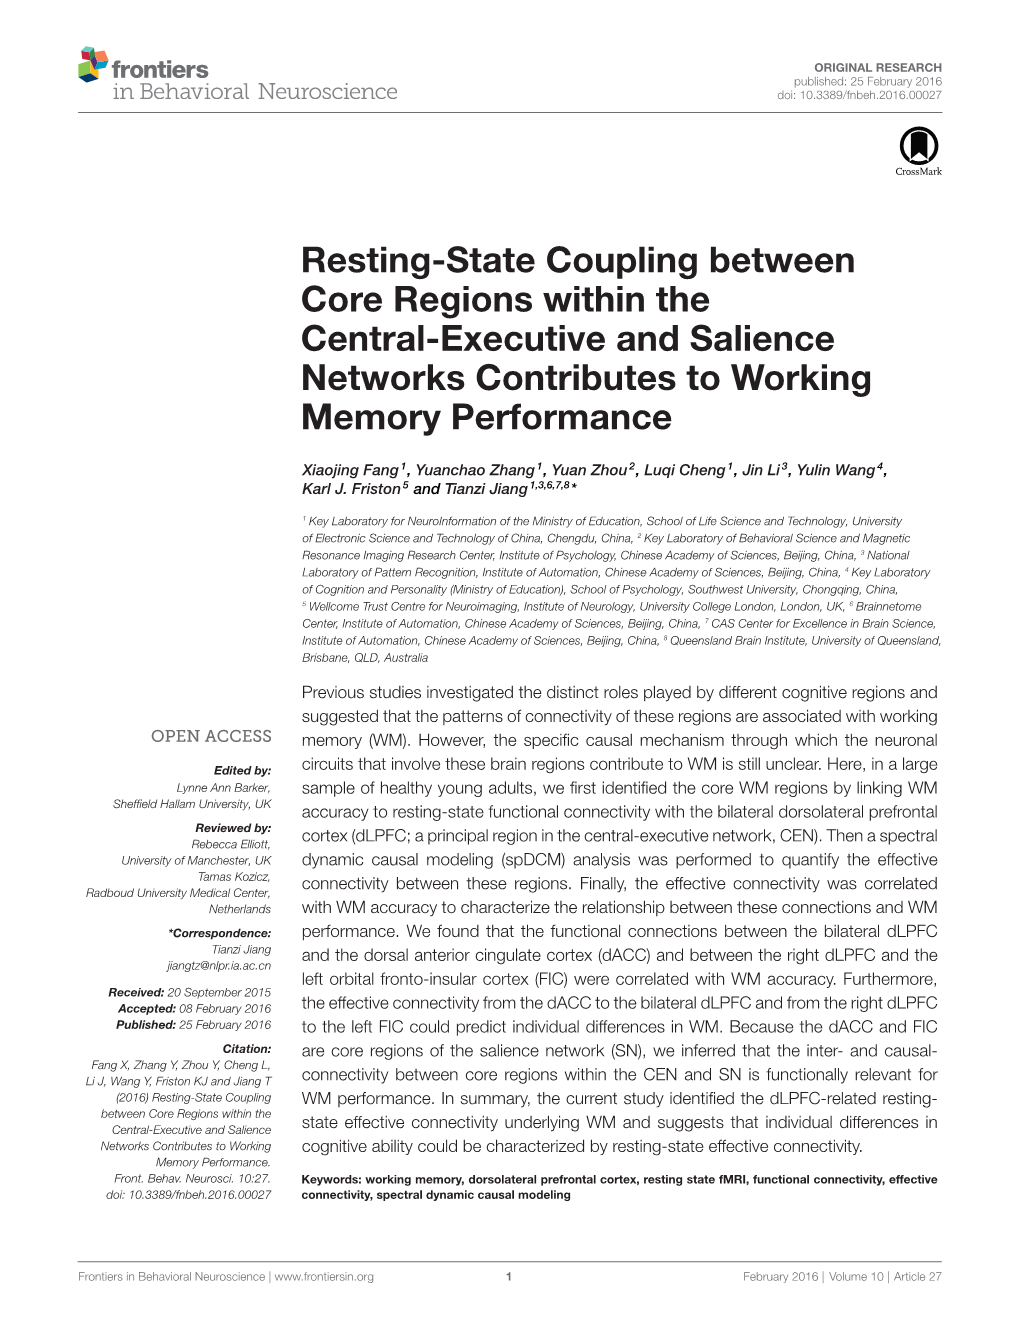 Resting-State Coupling Between Core Regions Within the Central-Executive and Salience Networks Contributes to Working Memory Performance